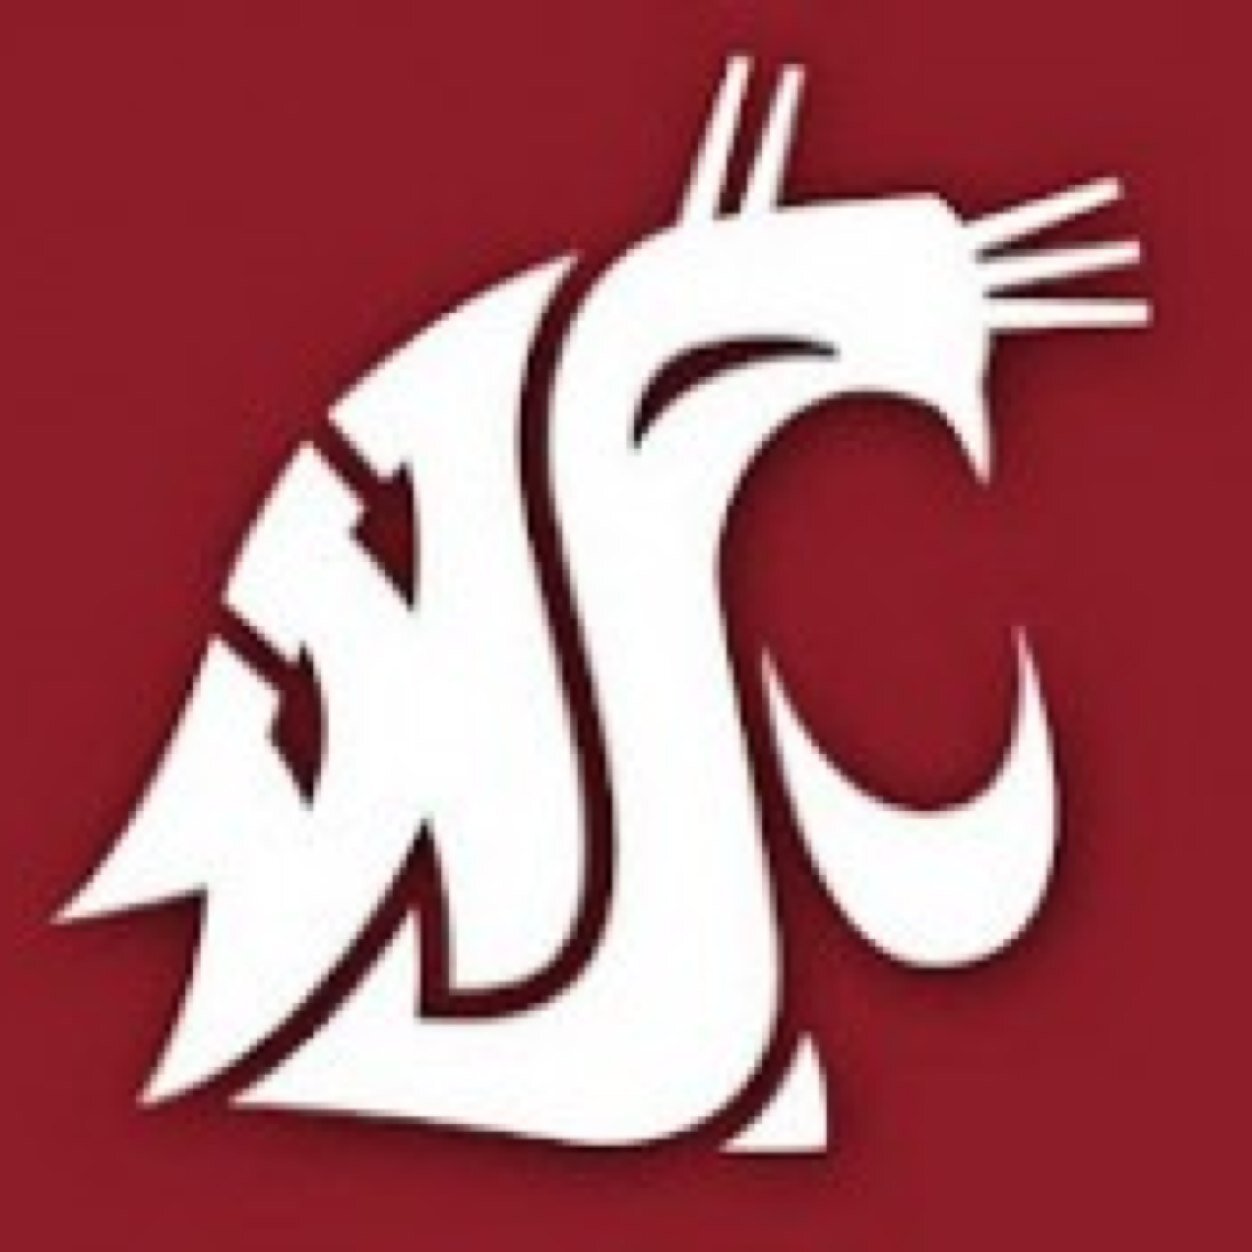 Man, it's tough being a Cougar sometimes… but… Once a Coug, always a Coug. Once a Husky, always a dog.